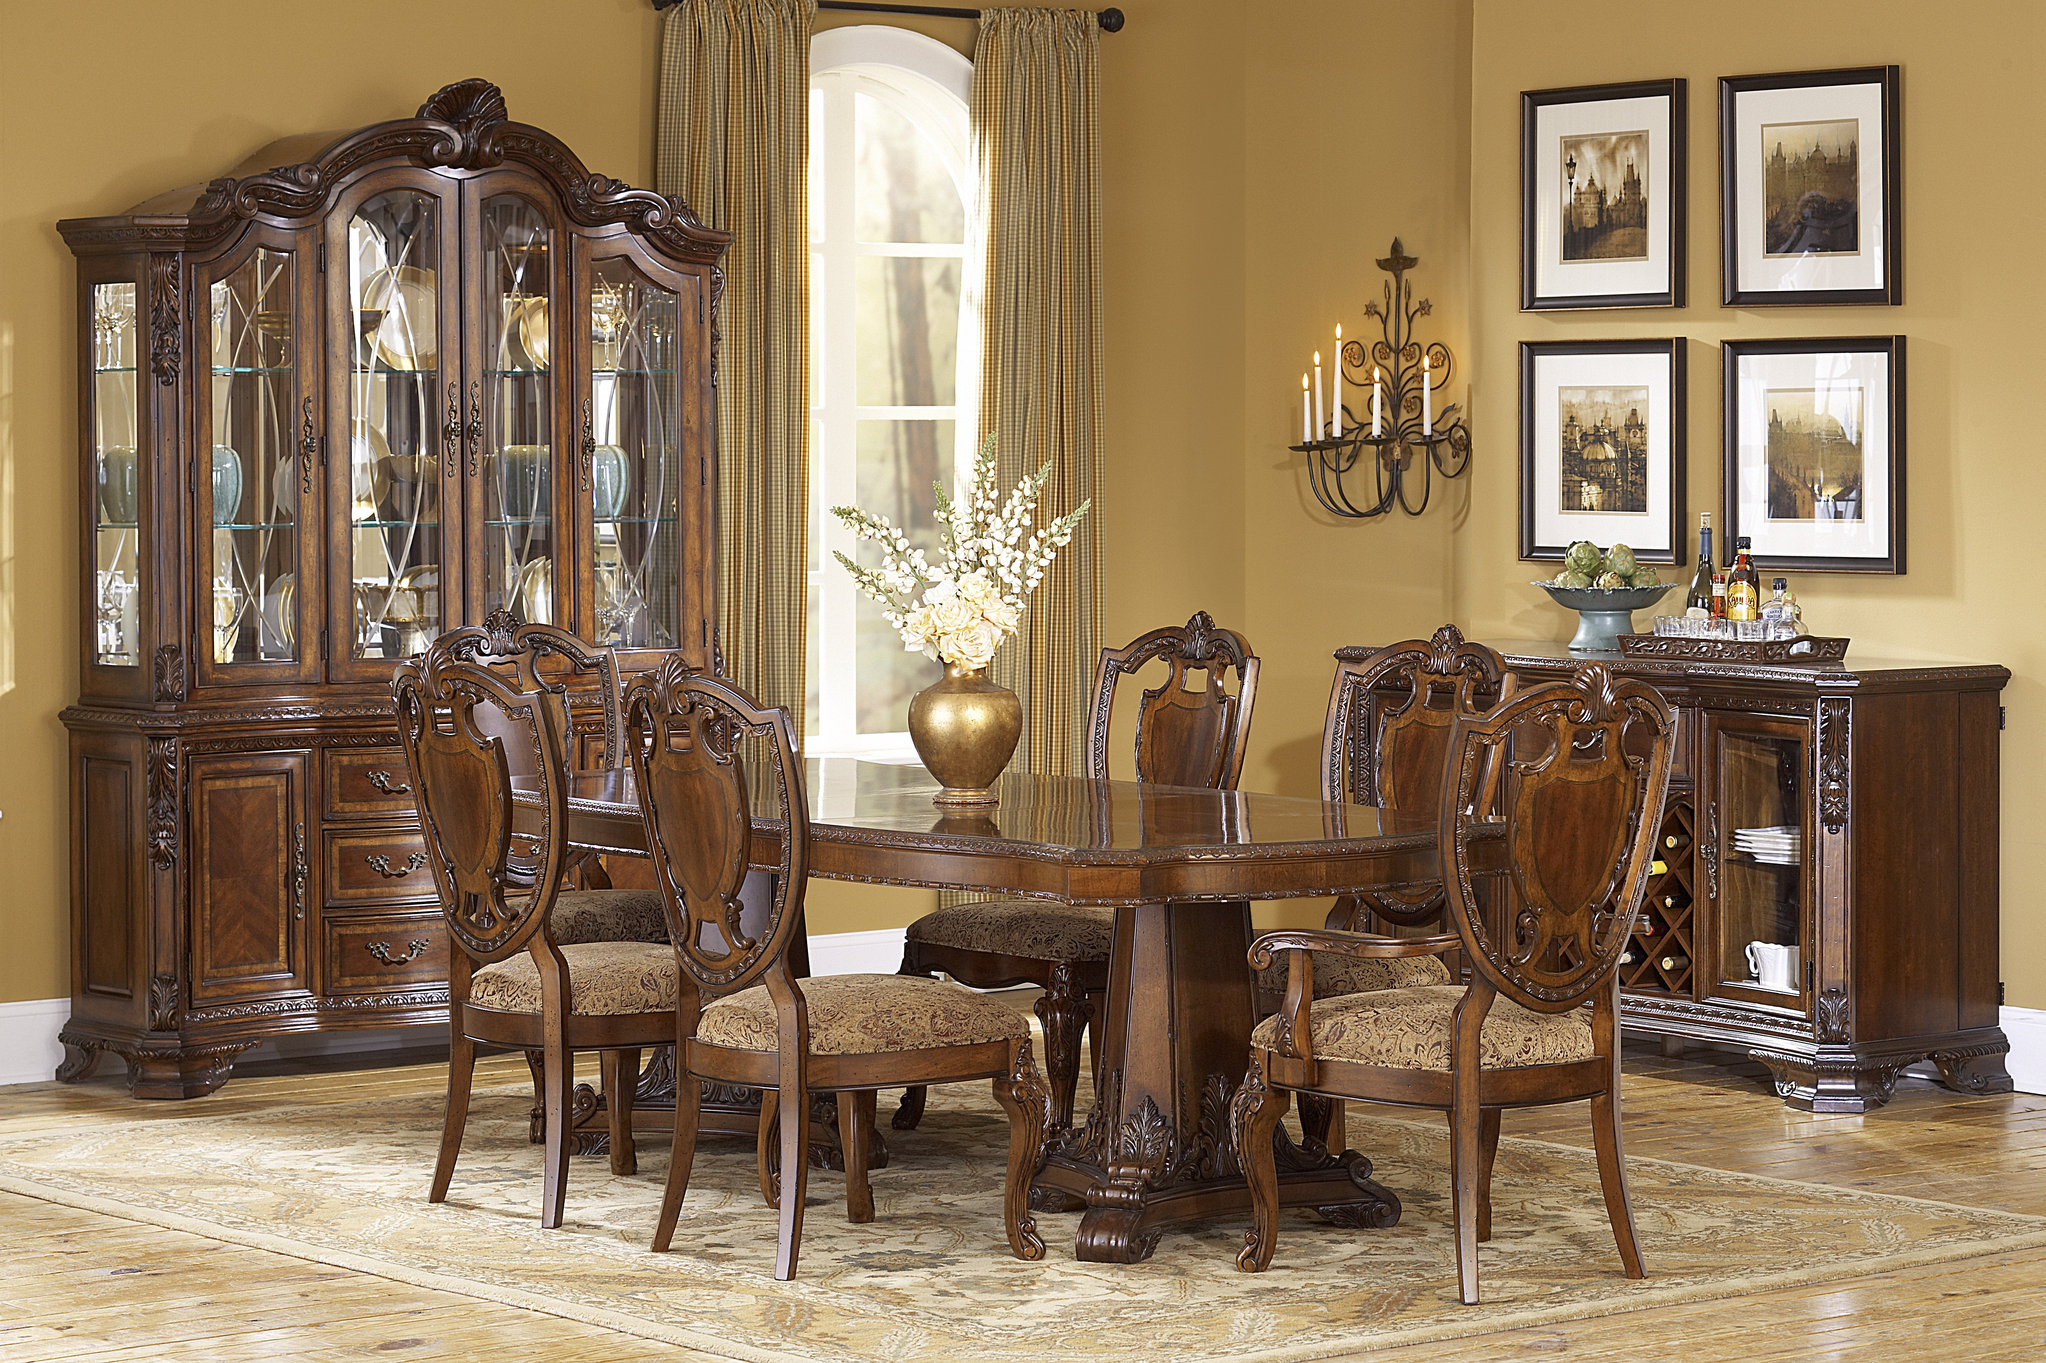 Old World Formal Double Pedestal Table Dining Room in sizing 2046 X 1363